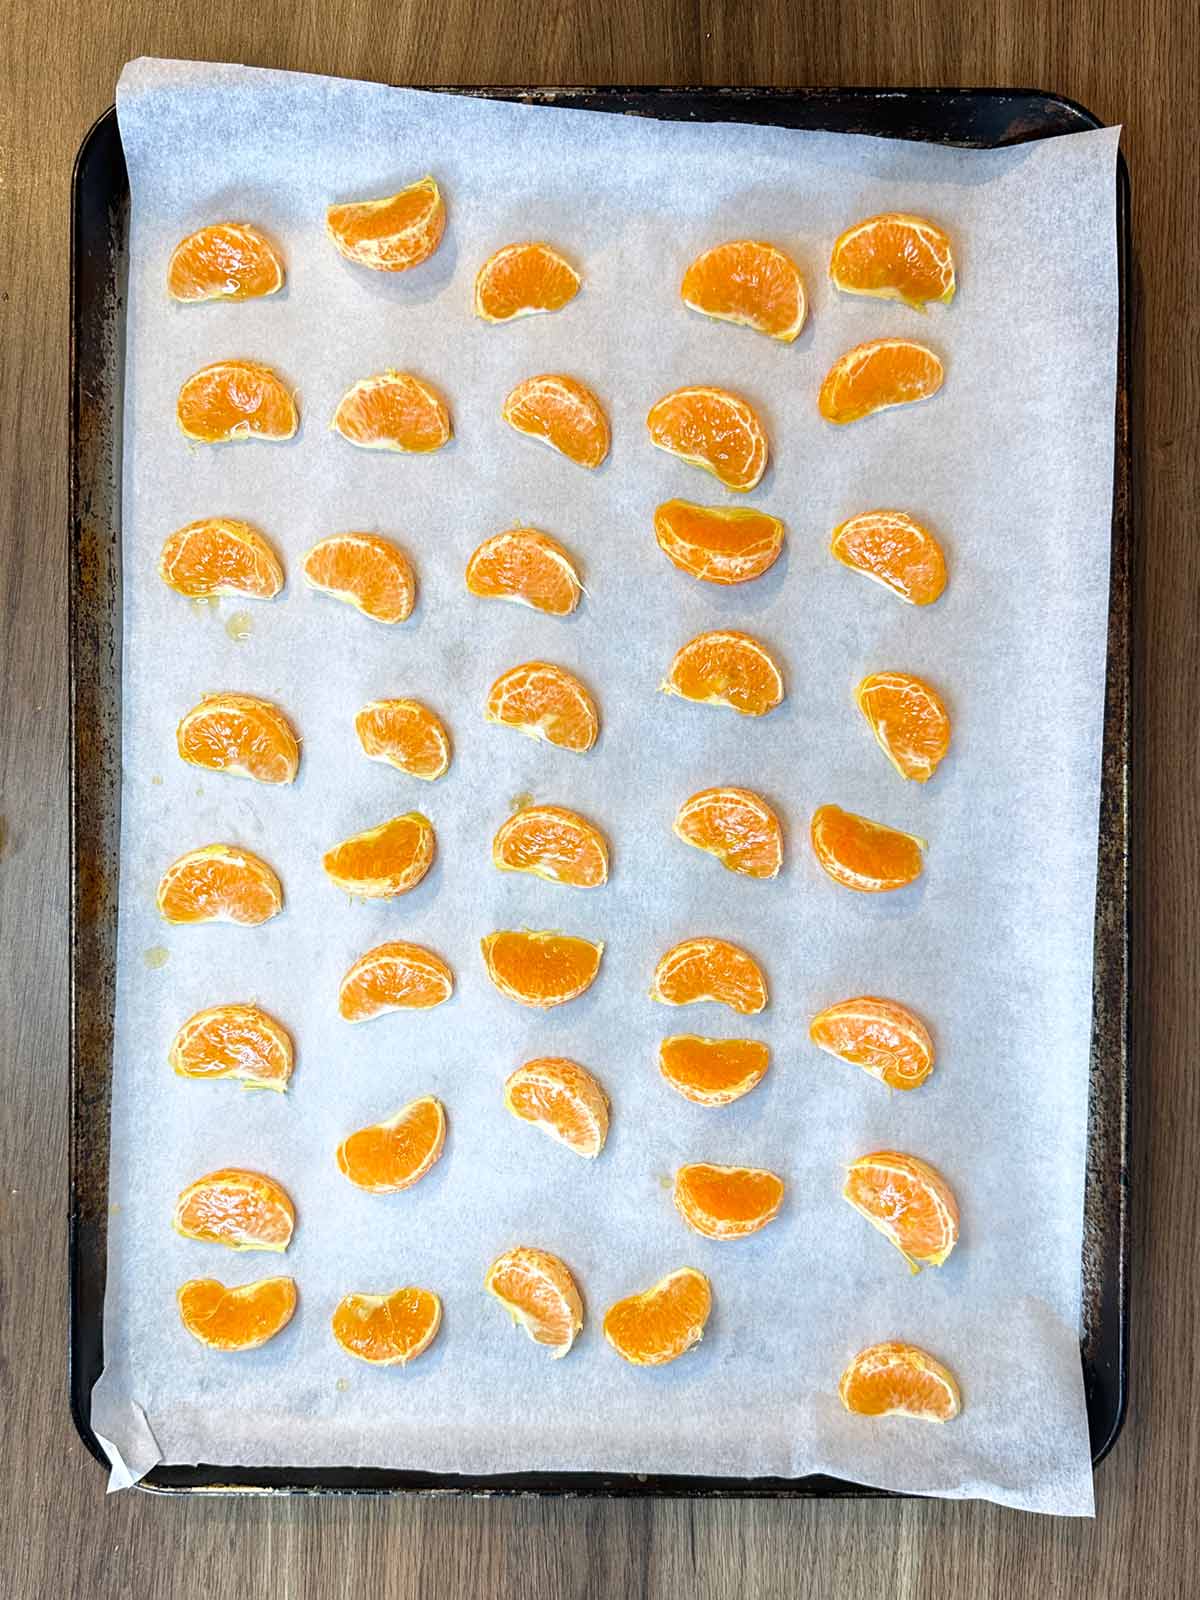 Satsuma segments laid out on a lined baking tray.